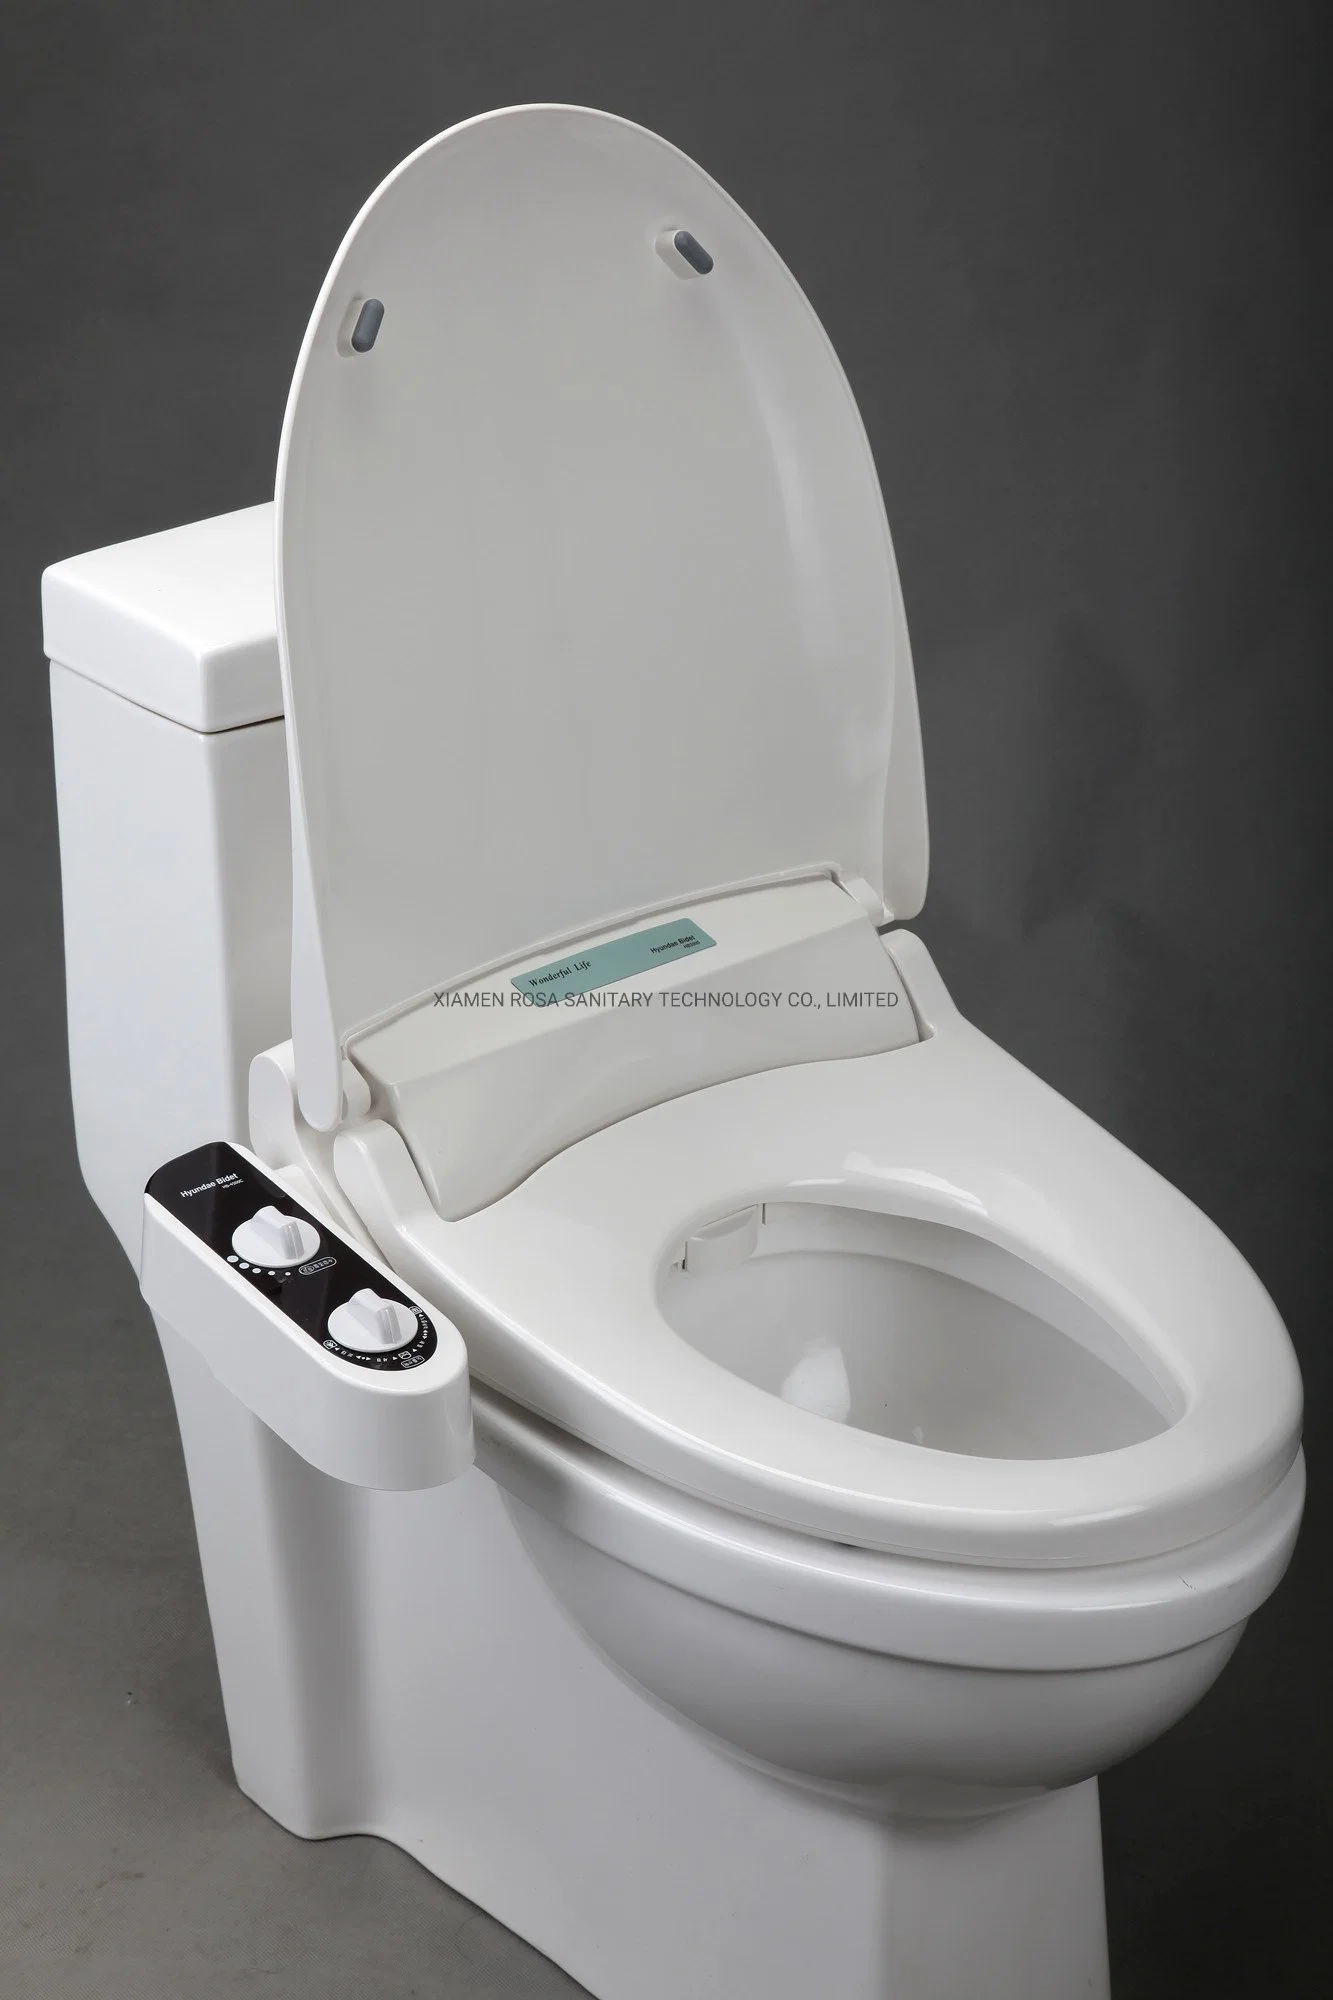 Bidet Toilet Seat Attachment a Non-Electric Self Cleaning Water Sprayer W/Adjustable Water Pressure Nozzle, Angle Control & Easy Home Installation